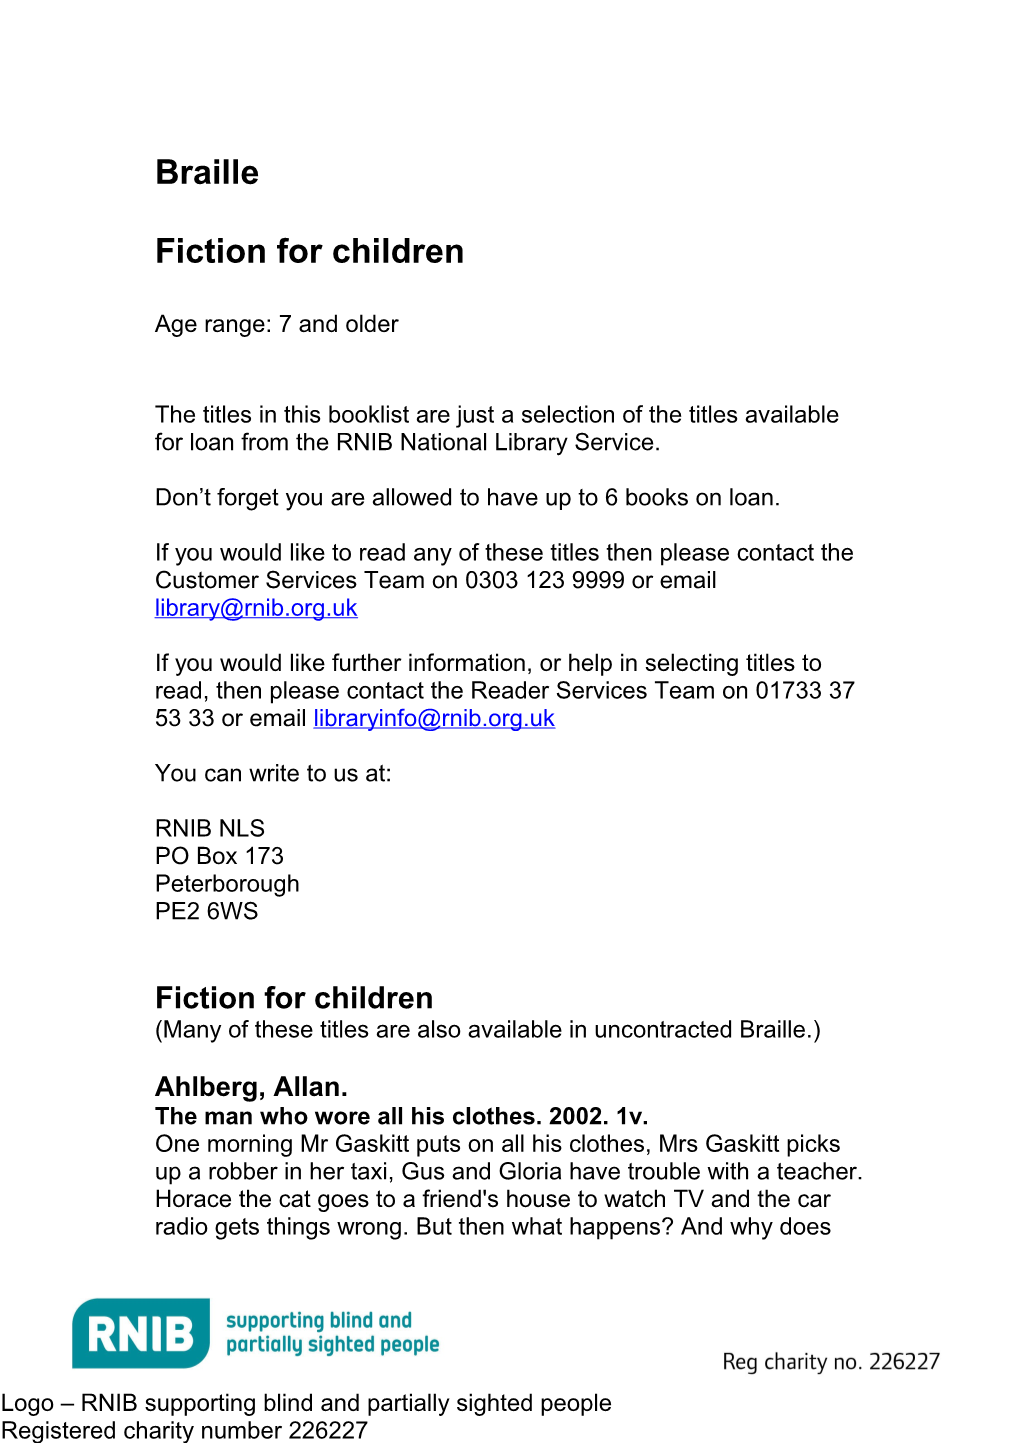 Fiction for Ages 7 and Older in Braille (Word, 200KB)